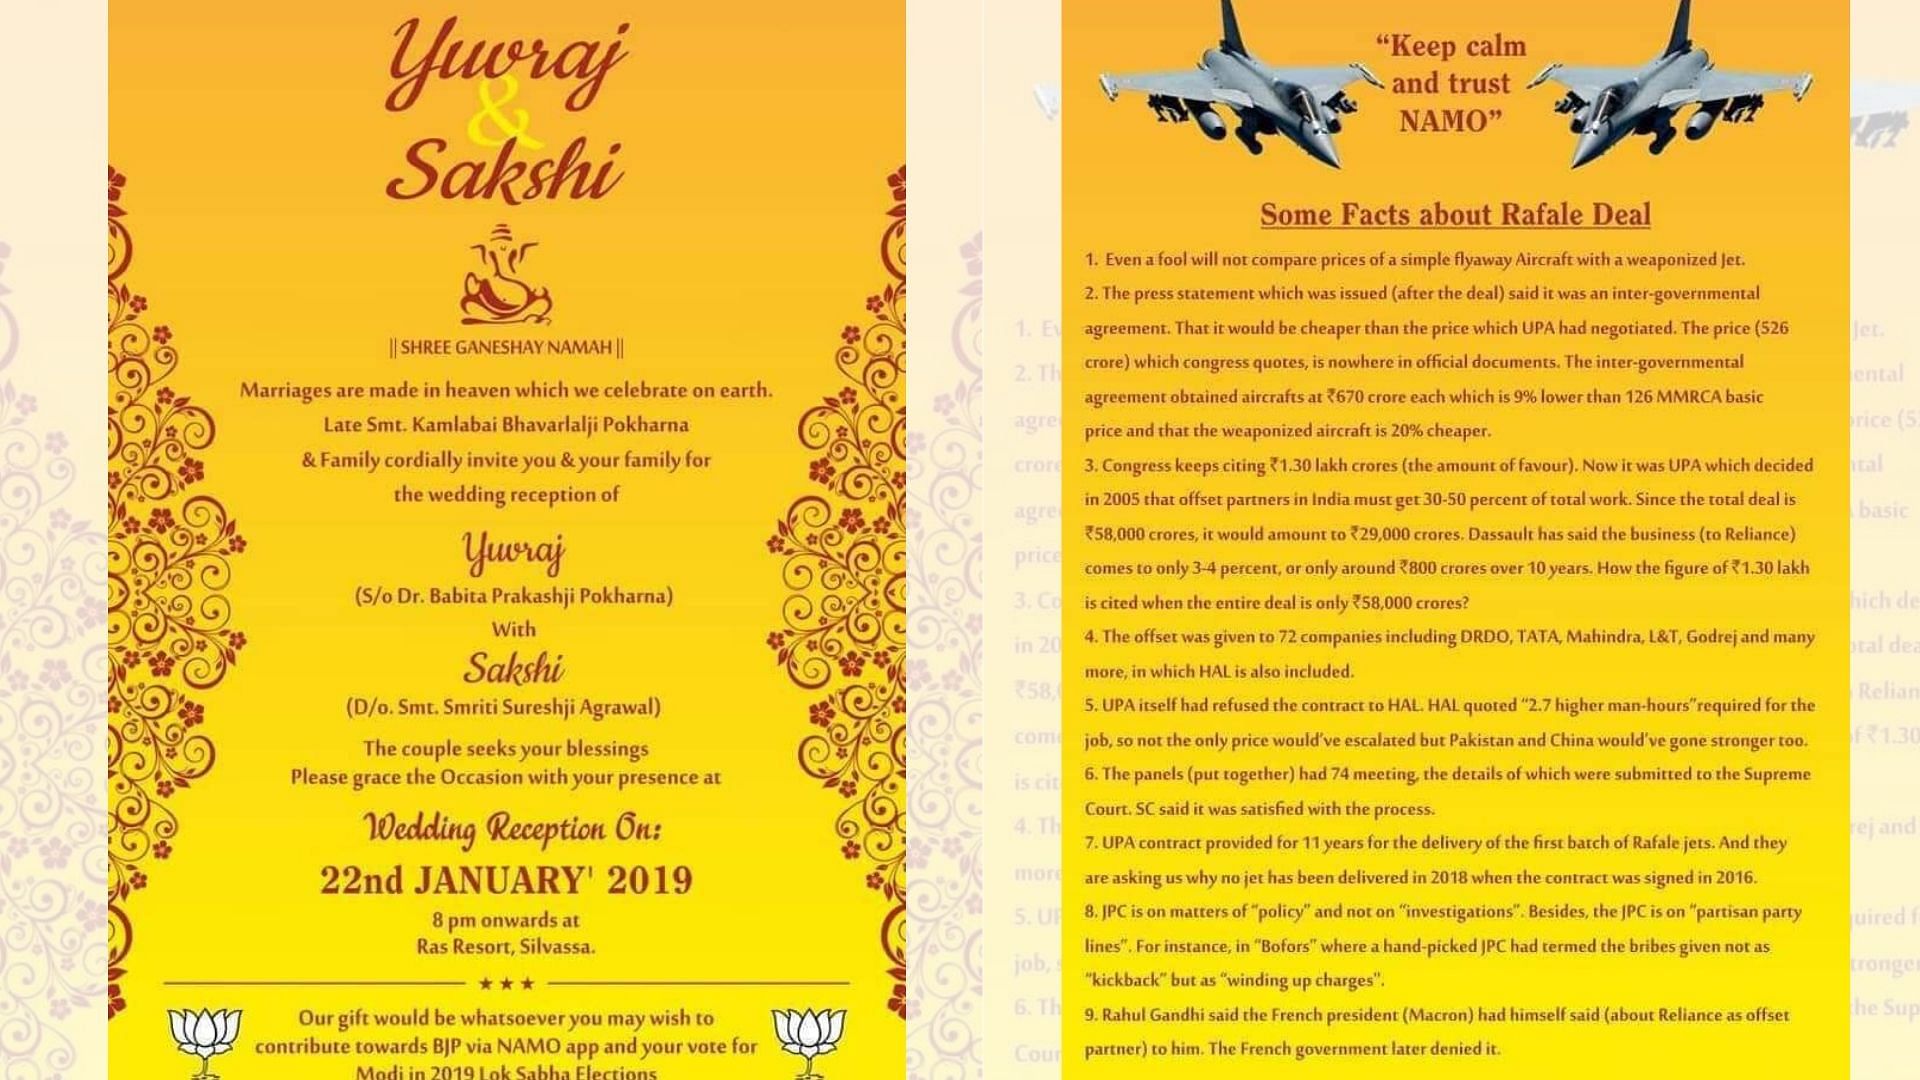 Prime Minister Narendra Modi described the content of the card as “ingenious” and asserted that it had inspired him to work even harder for the country.